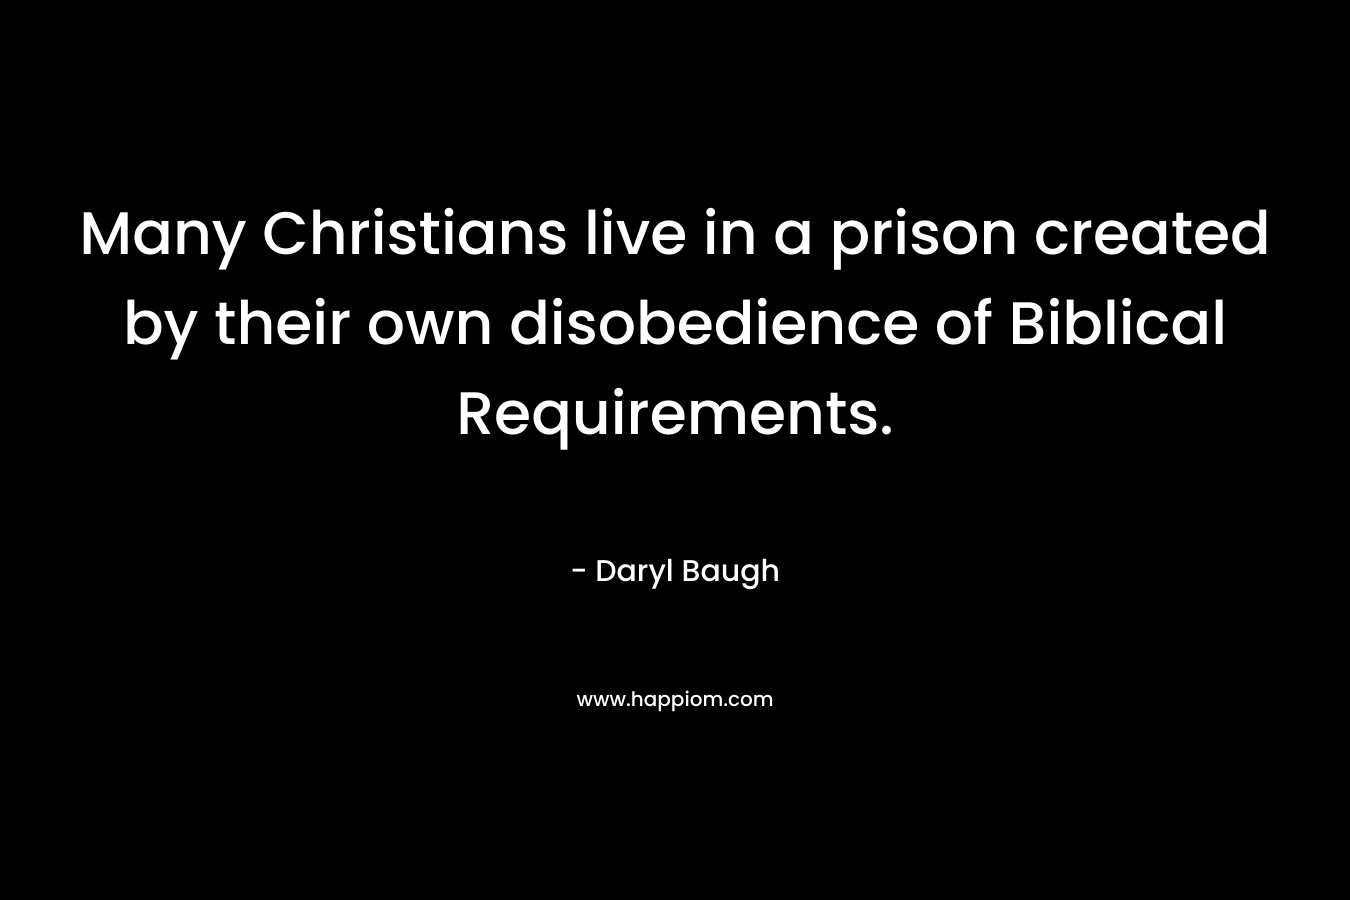 Many Christians live in a prison created by their own disobedience of Biblical Requirements.